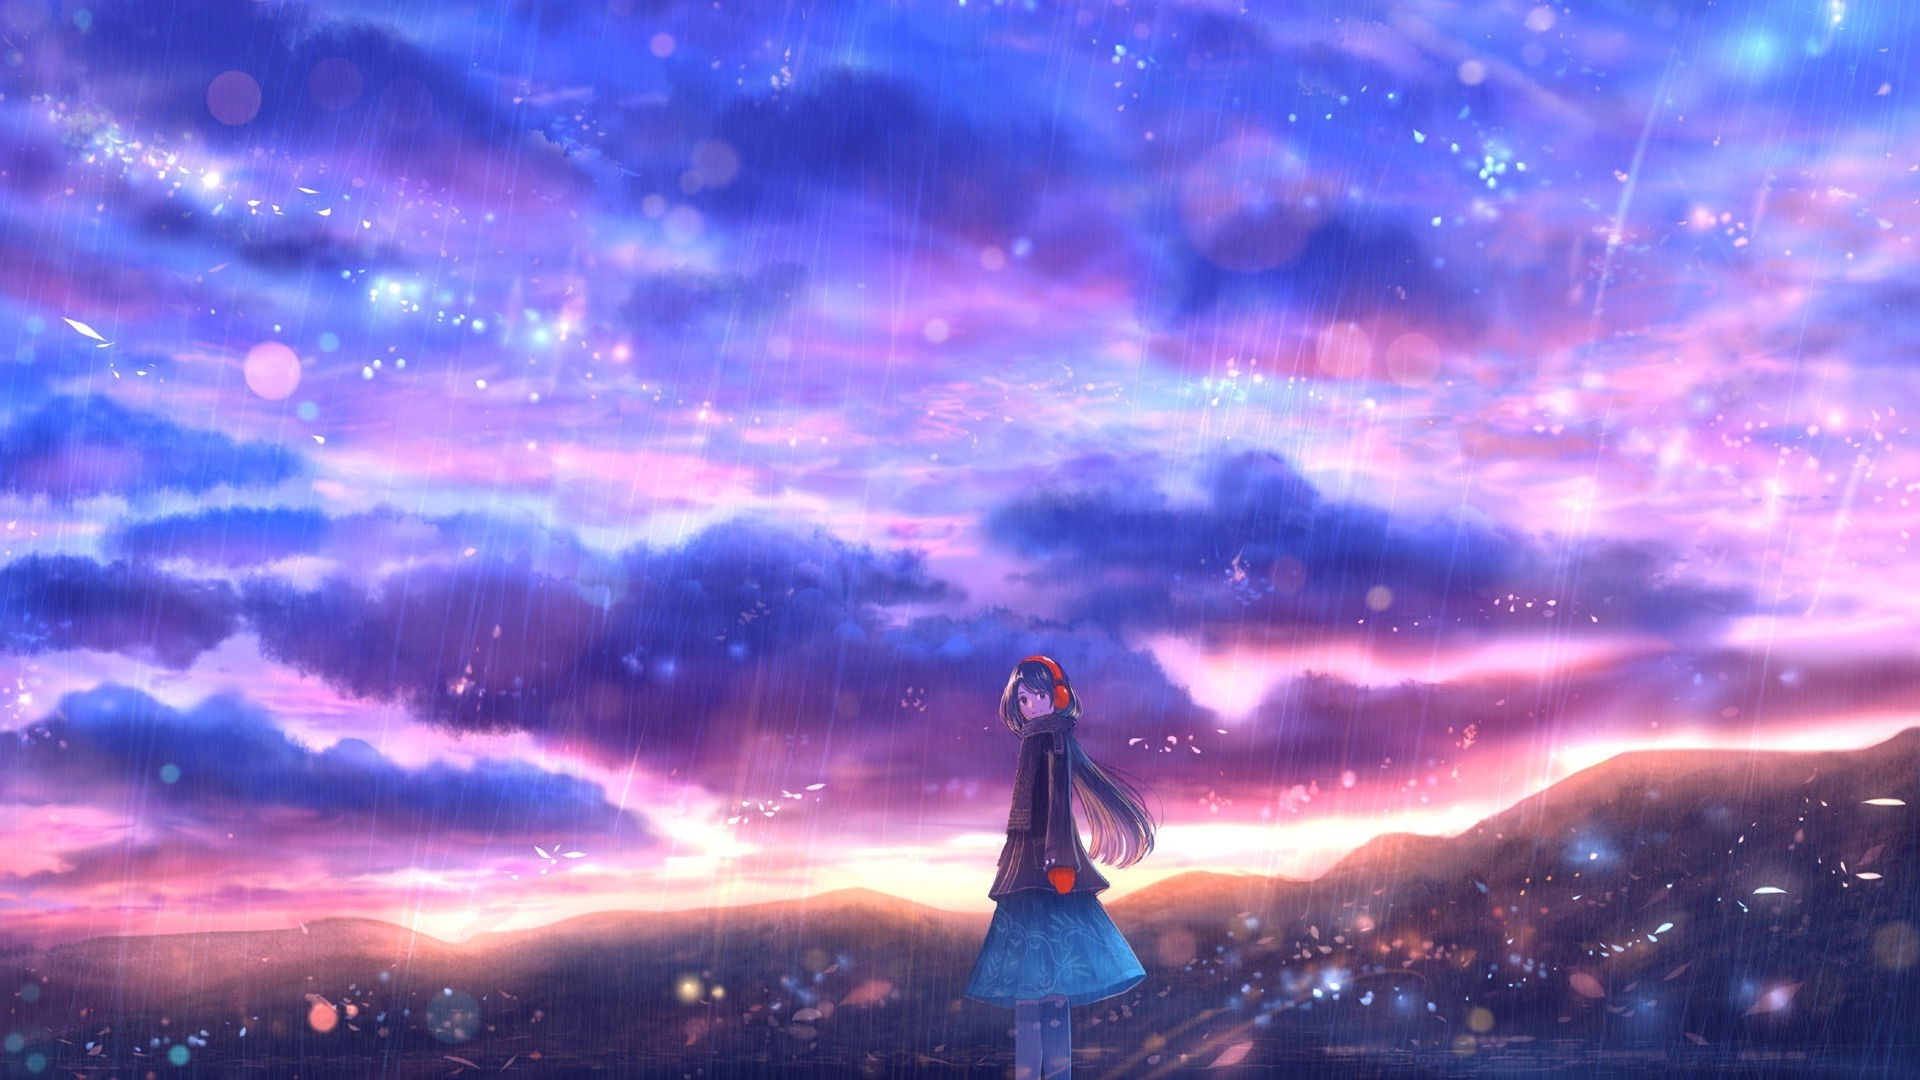 Download 1920x1200 wallpaper rain, clouds, colorful, sky, anime girl, widescreen 16: widescreen, 1920x1200 HD image, background, 3204